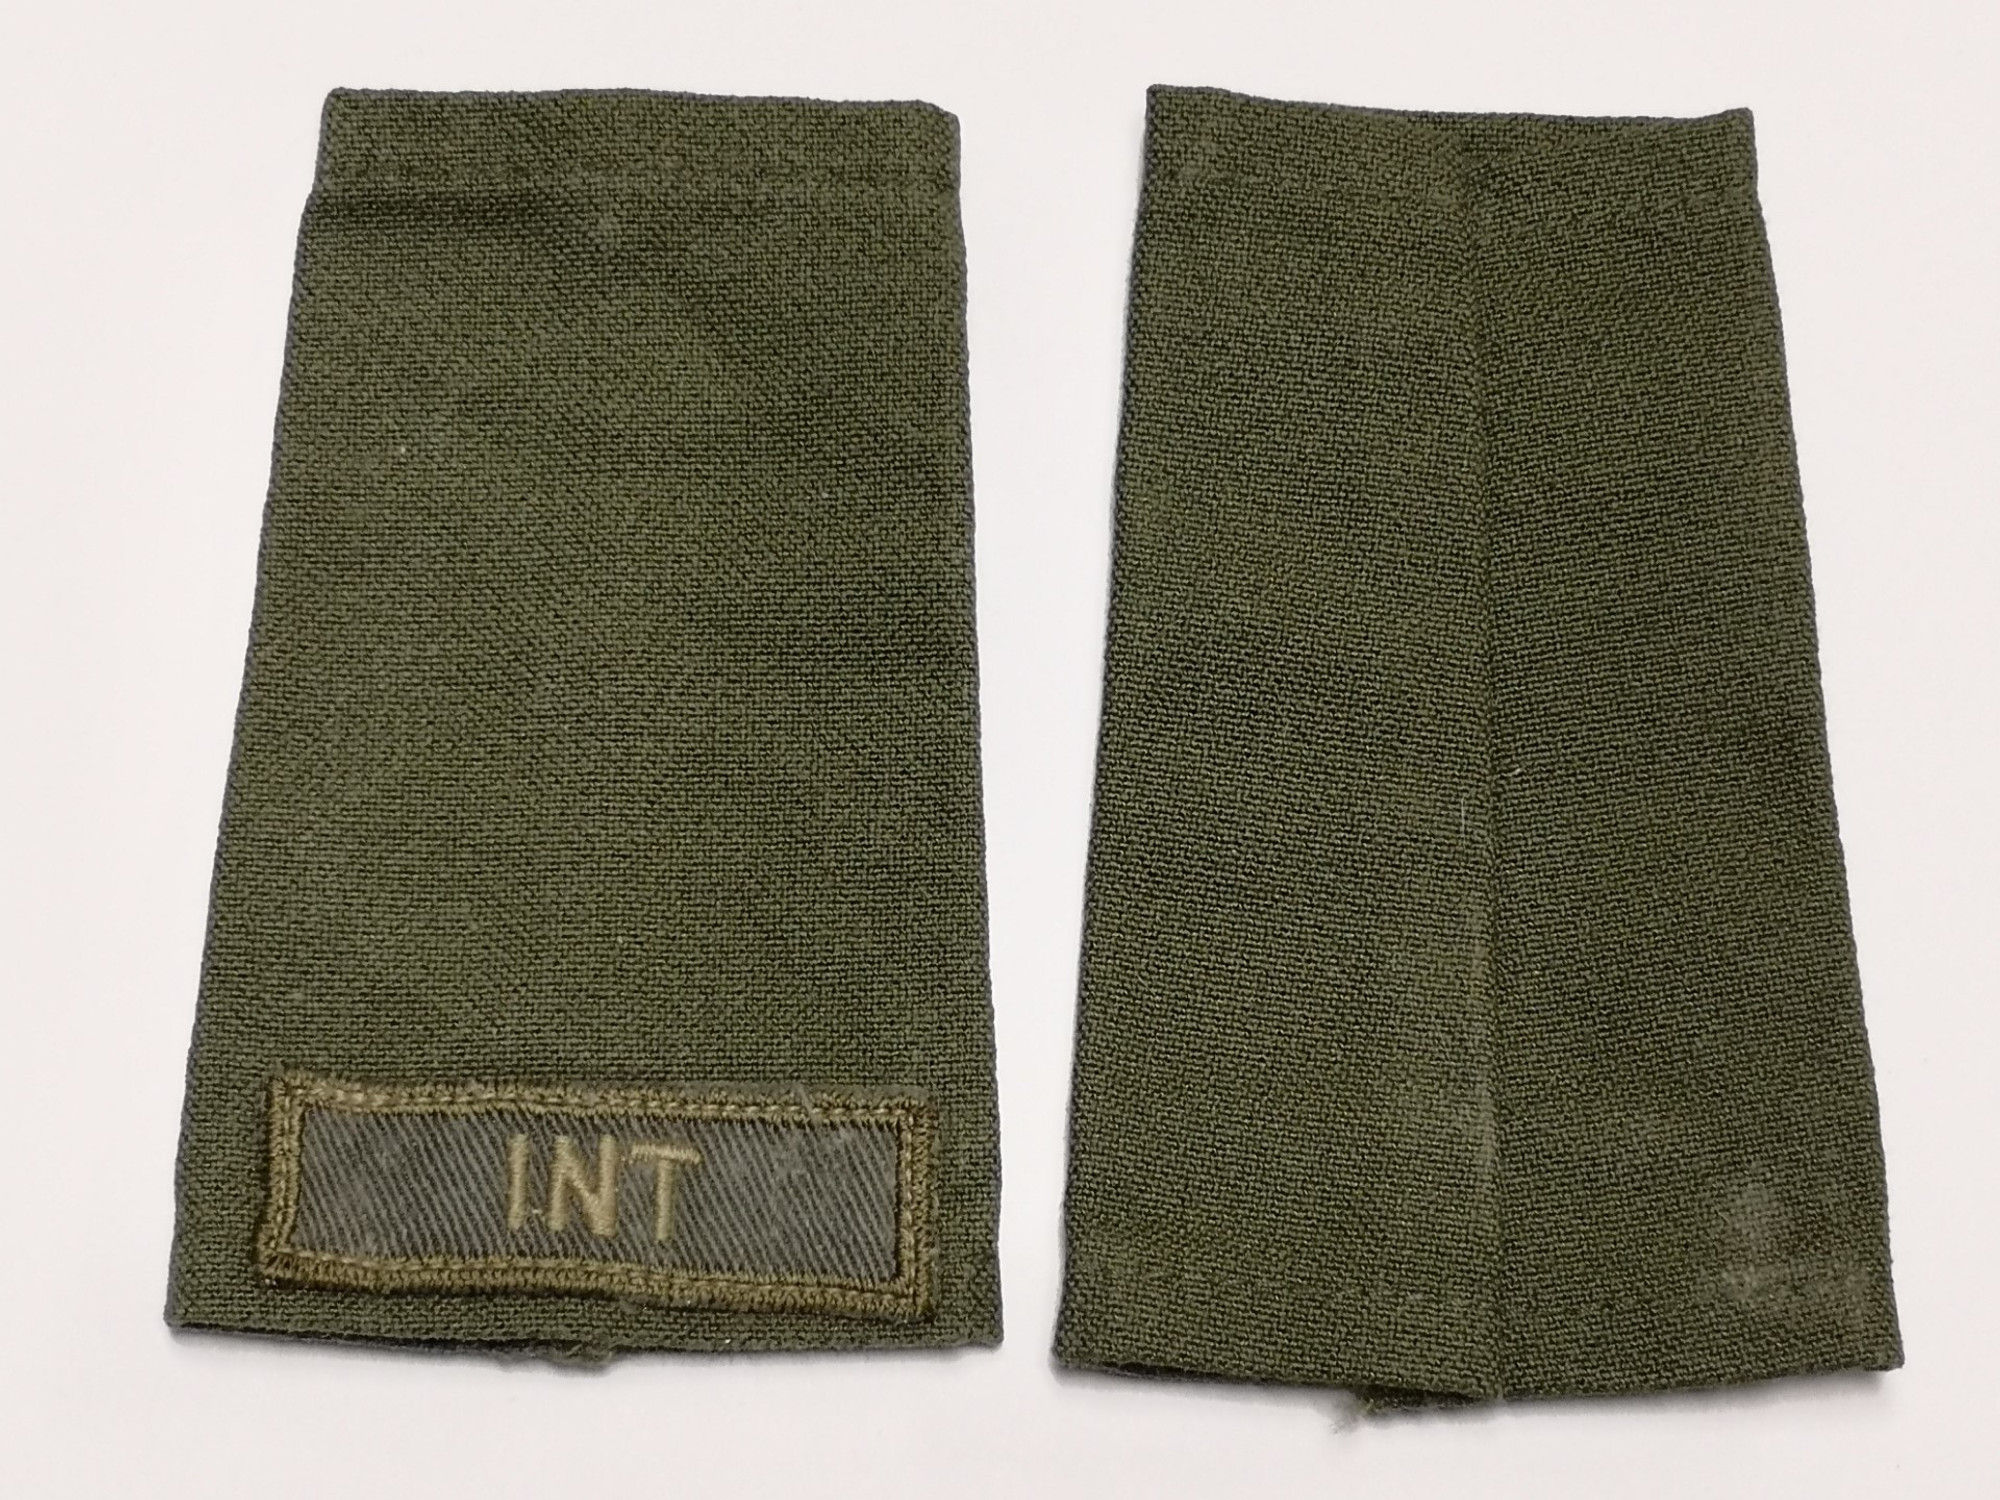 Canadian Armed Forces Green Rank Epaulets INT - Private (Basic)